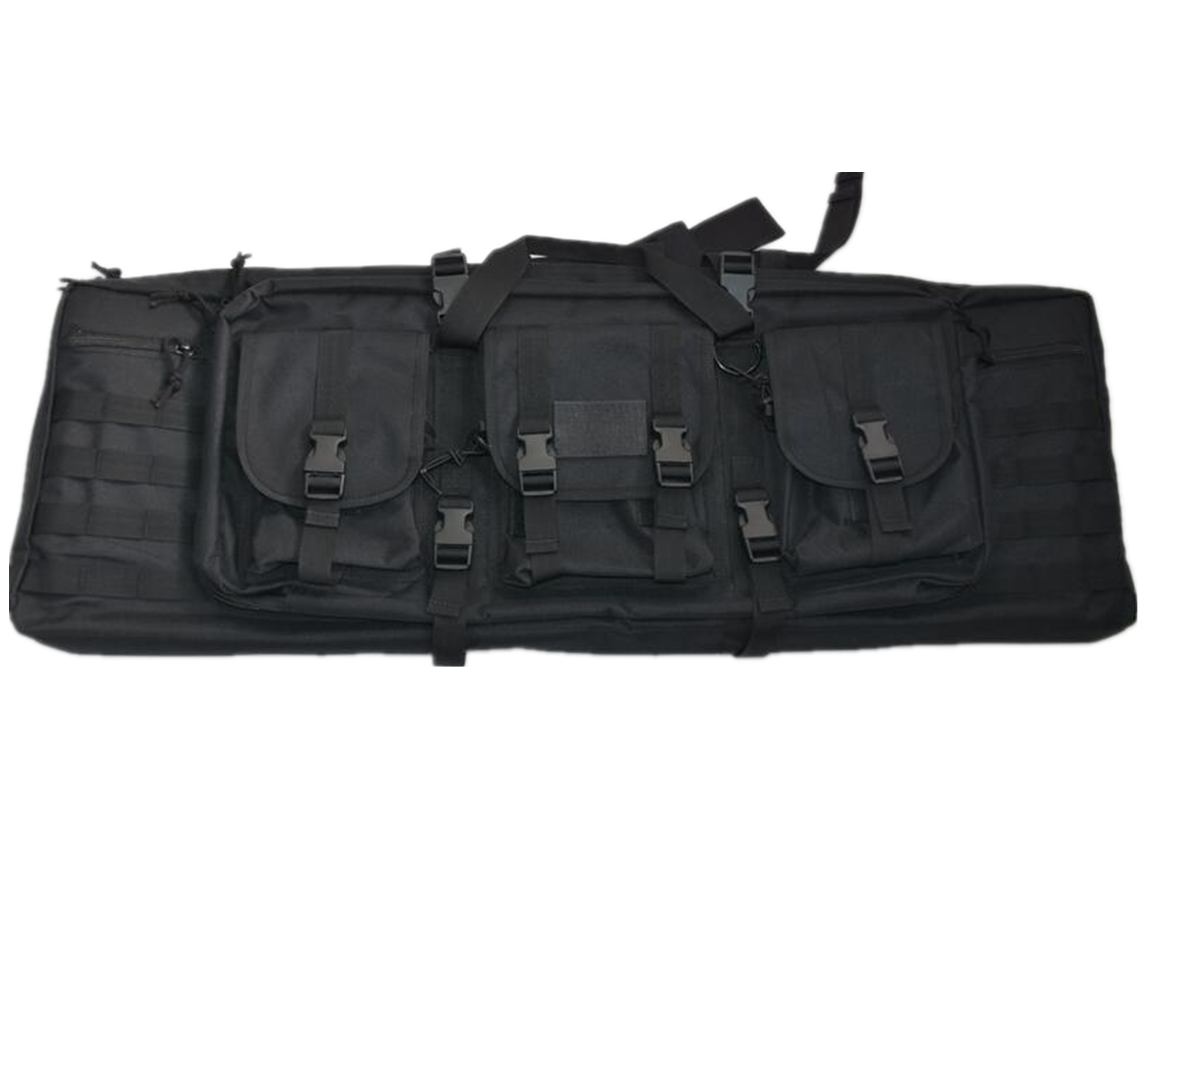 Tactical Military Sniper Rifle Pistol Bag 38 inch length